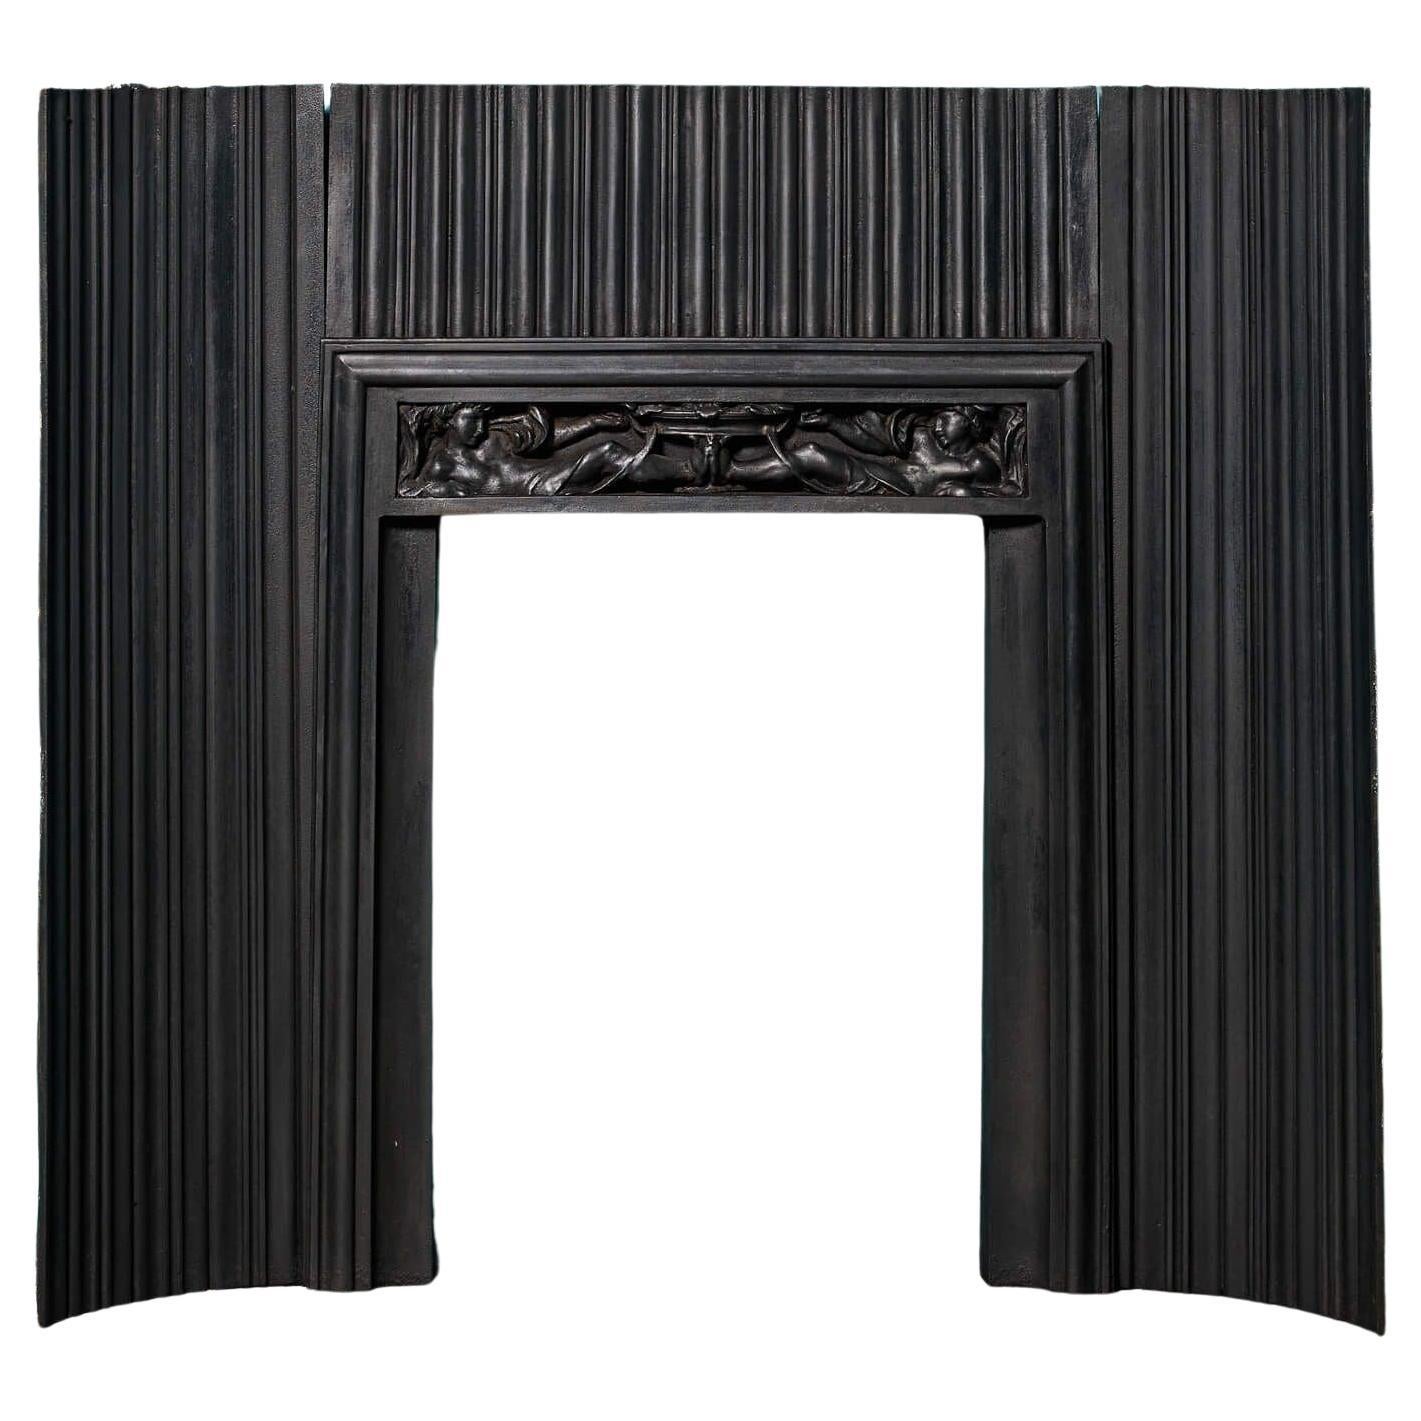 Cast Fireplaces and Mantels